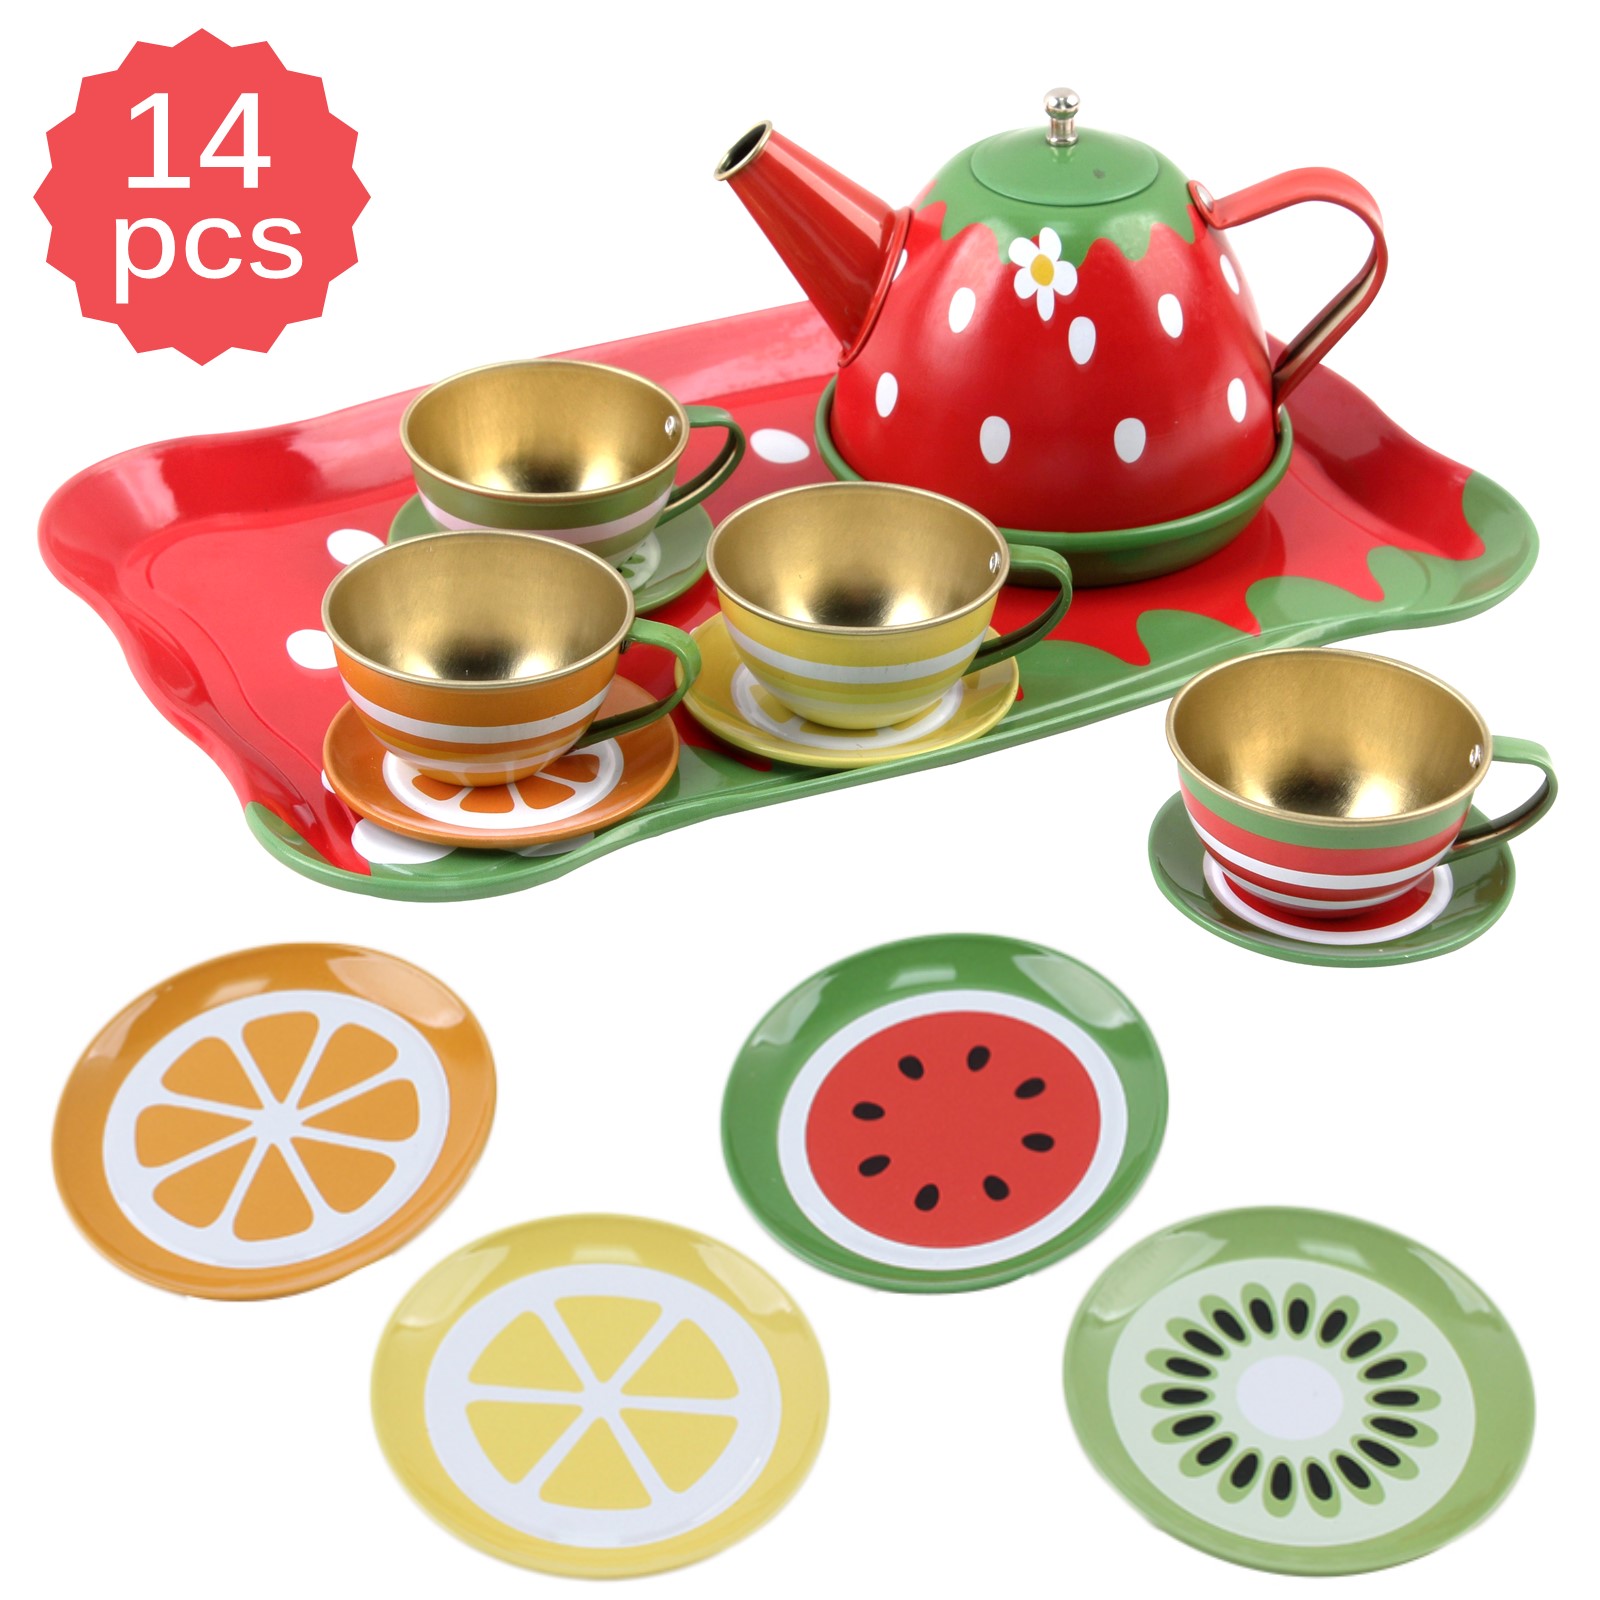 Vokodo Kids Fruit Themed Pretend Play Tea Set 14 Piece Durably Built From Food-Safe Material BPA-Free Kitchen Playset Perfect Early Learning Preschool Toy Great Gift For Children Girls Boys Toddlers